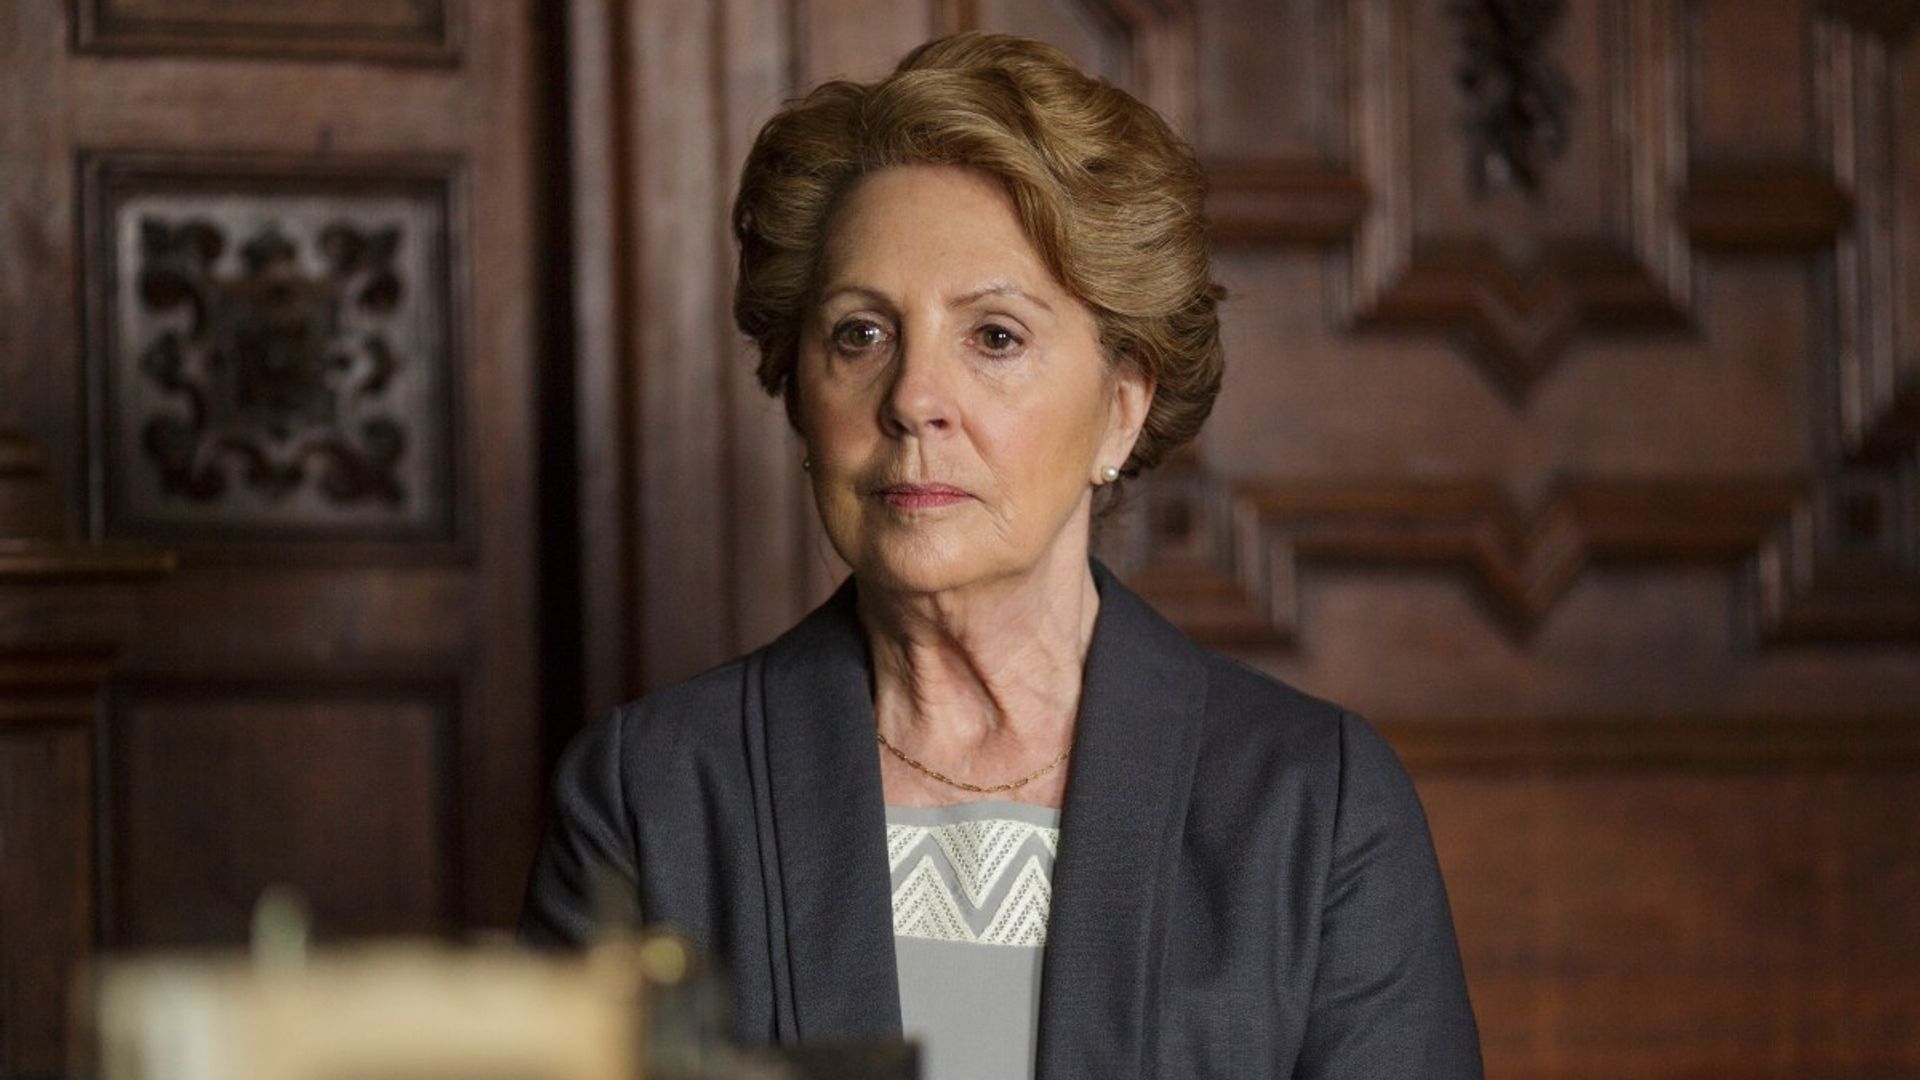 Downton Abbey star Penelope Wilton was once married to Lord of the Rings star - details 